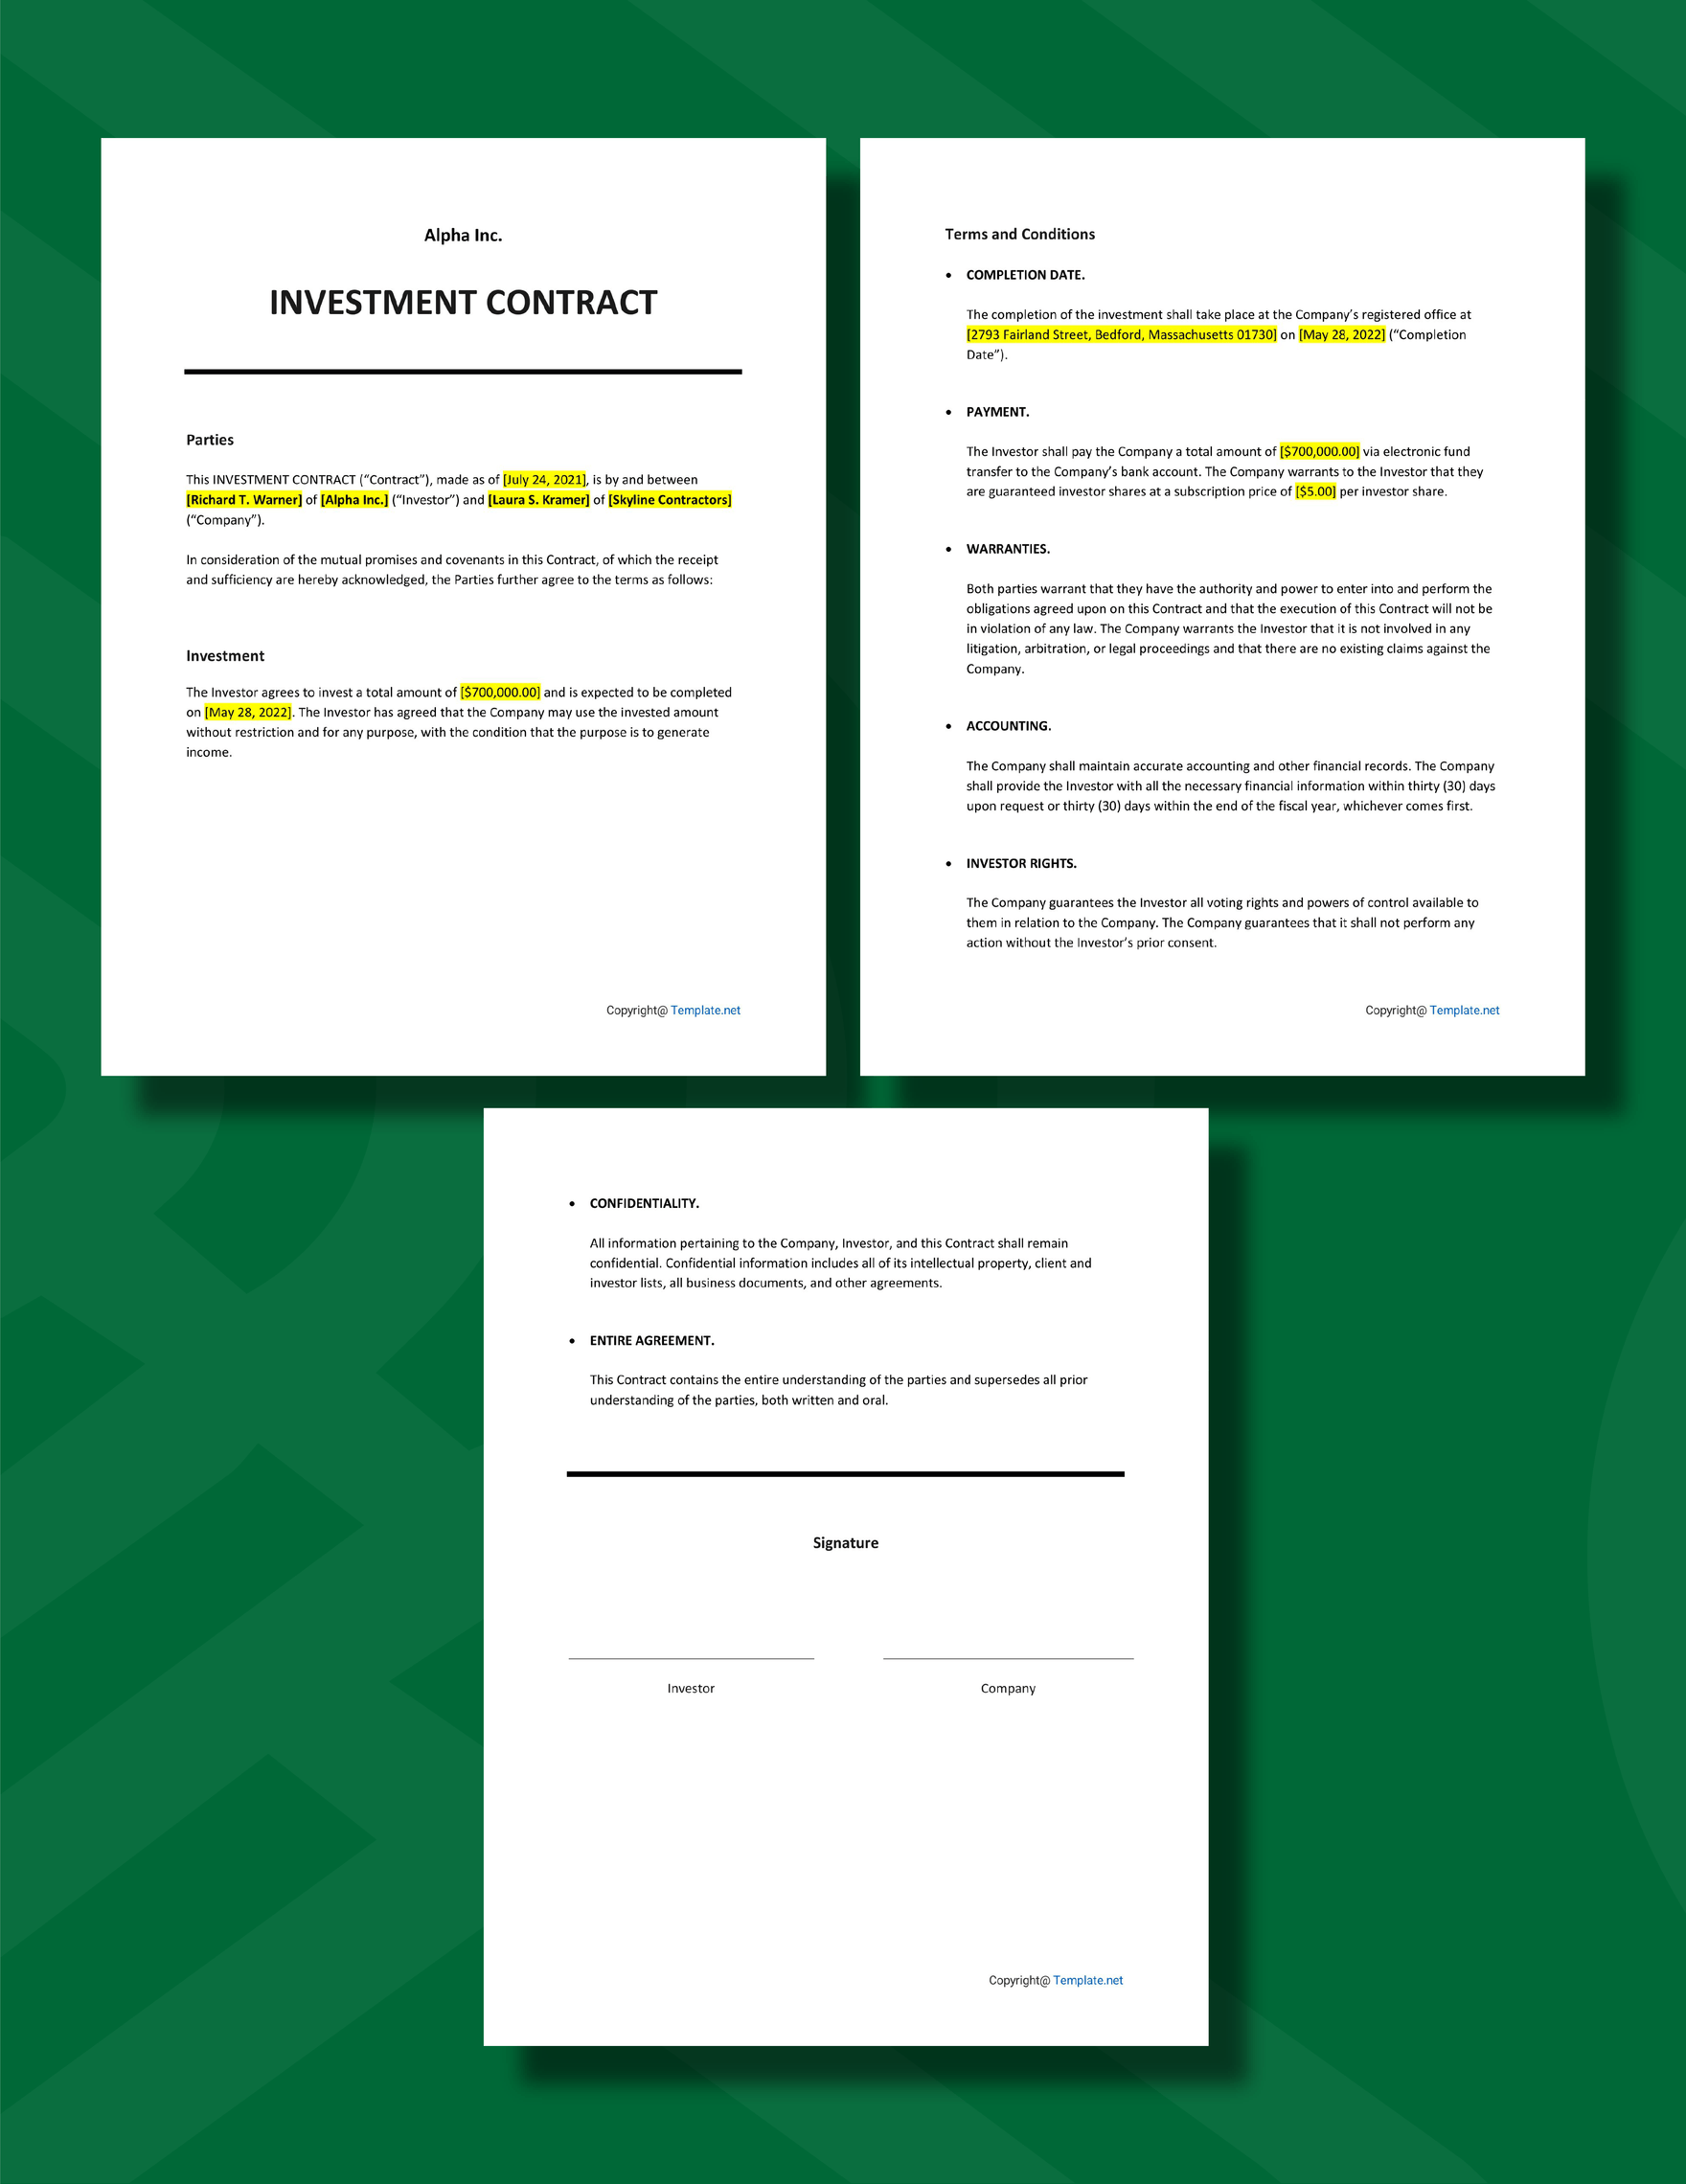 Sample Investment contract Template